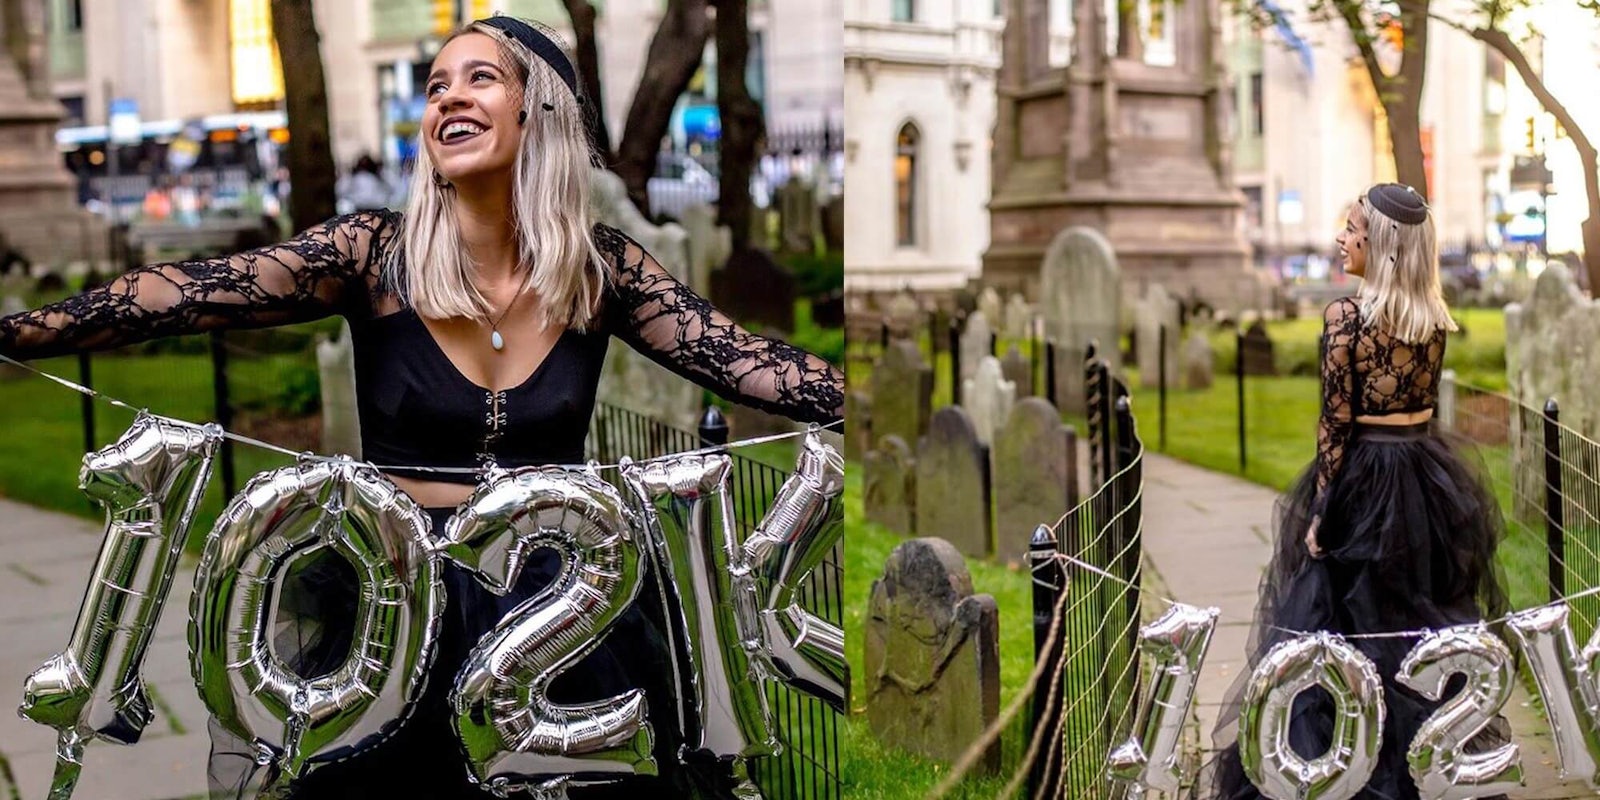 Mandy Velez seen posing with balloons at her student loan funeral